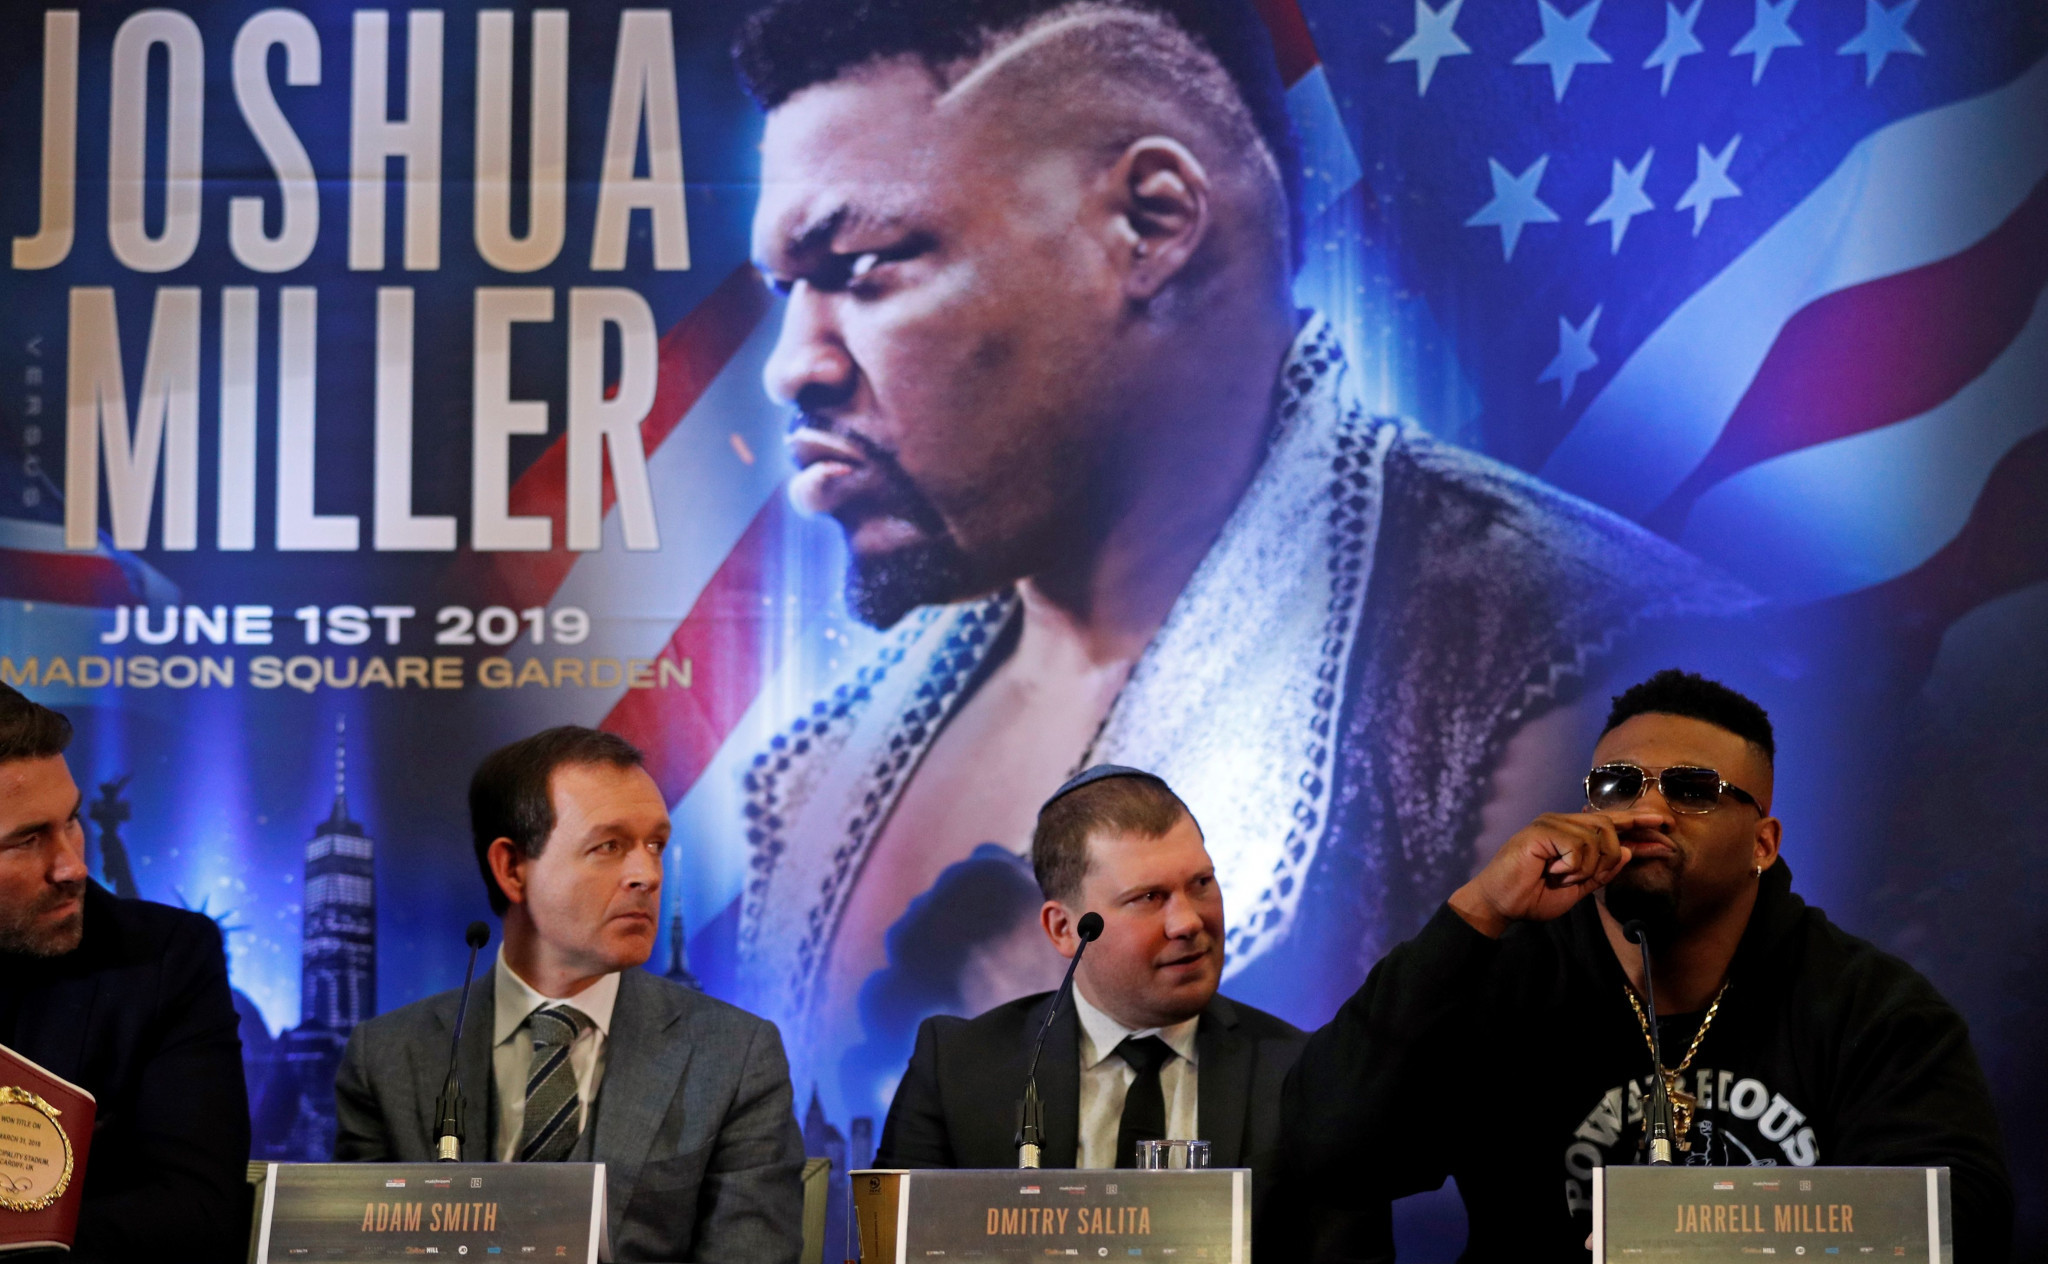 American Jarrell Miller had been due to face Anthony Joshua before news of his failed tests emerged ©Getty Images